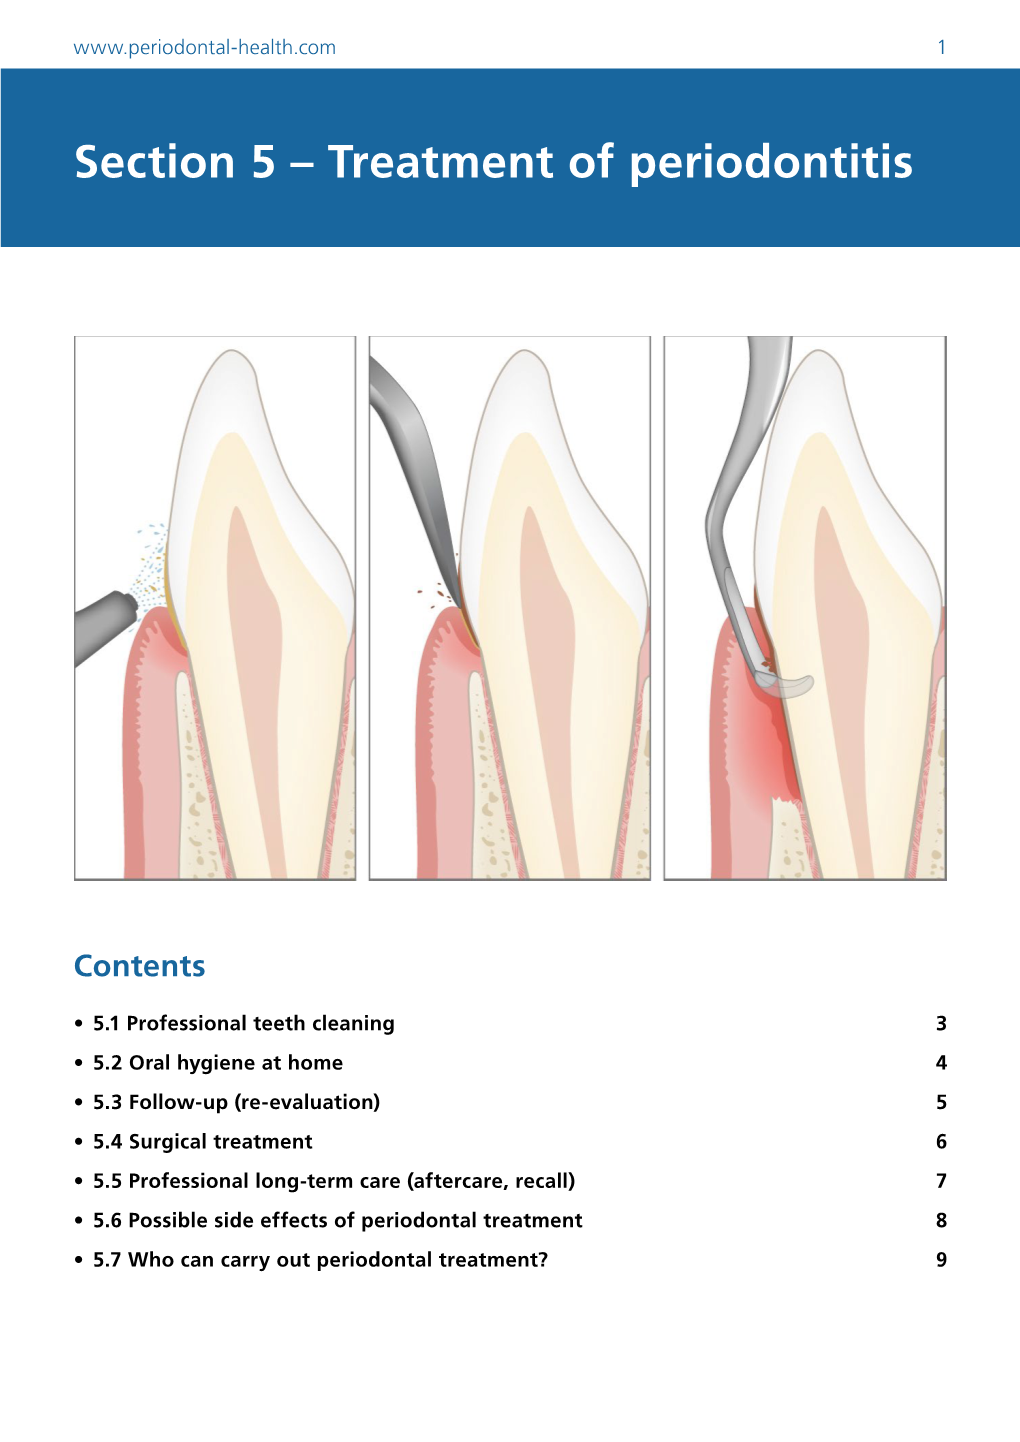 Section 5 – Treatment of Periodontitis